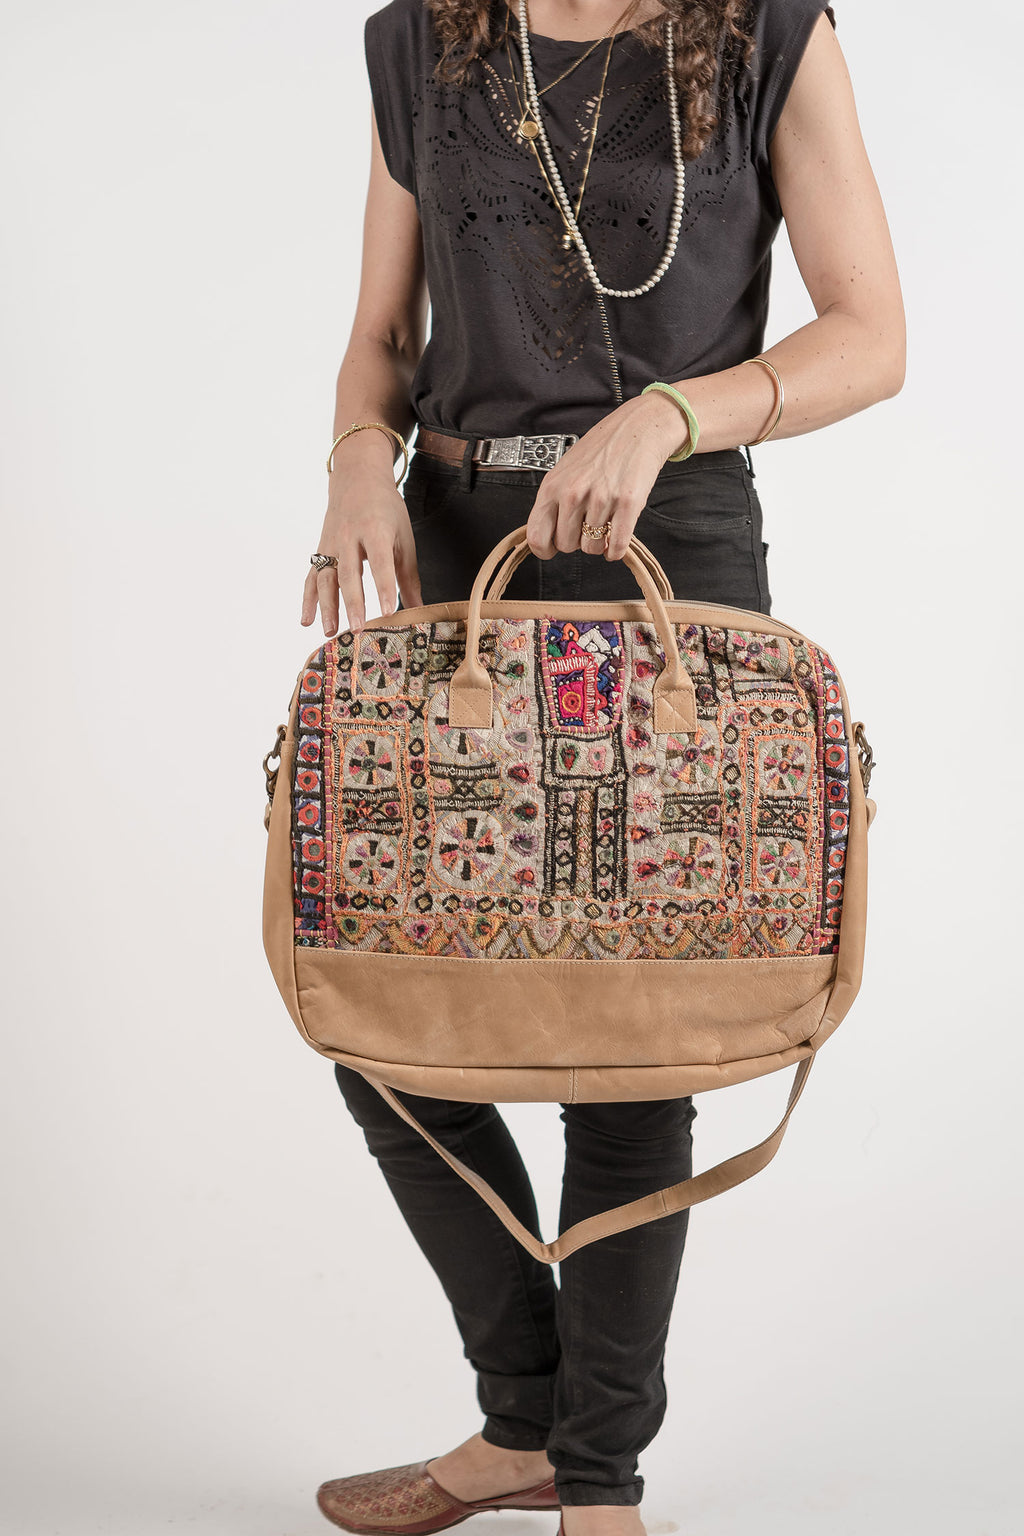 Bohemian Laptop Bag with Embroidery